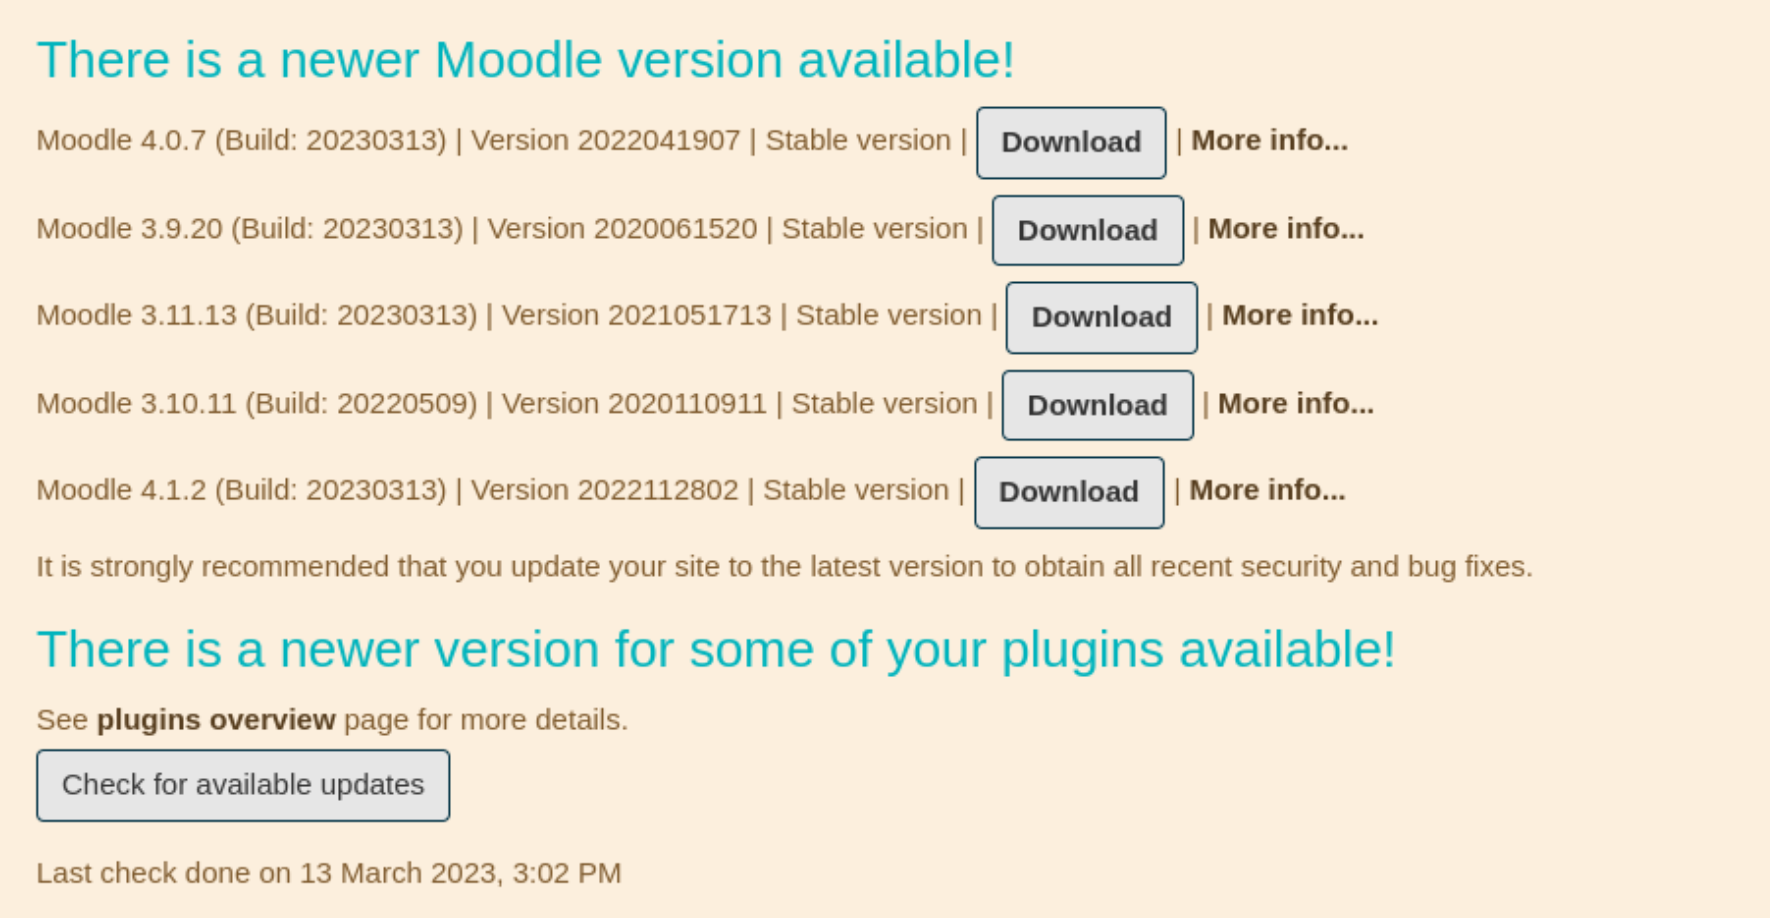 Moodle version available